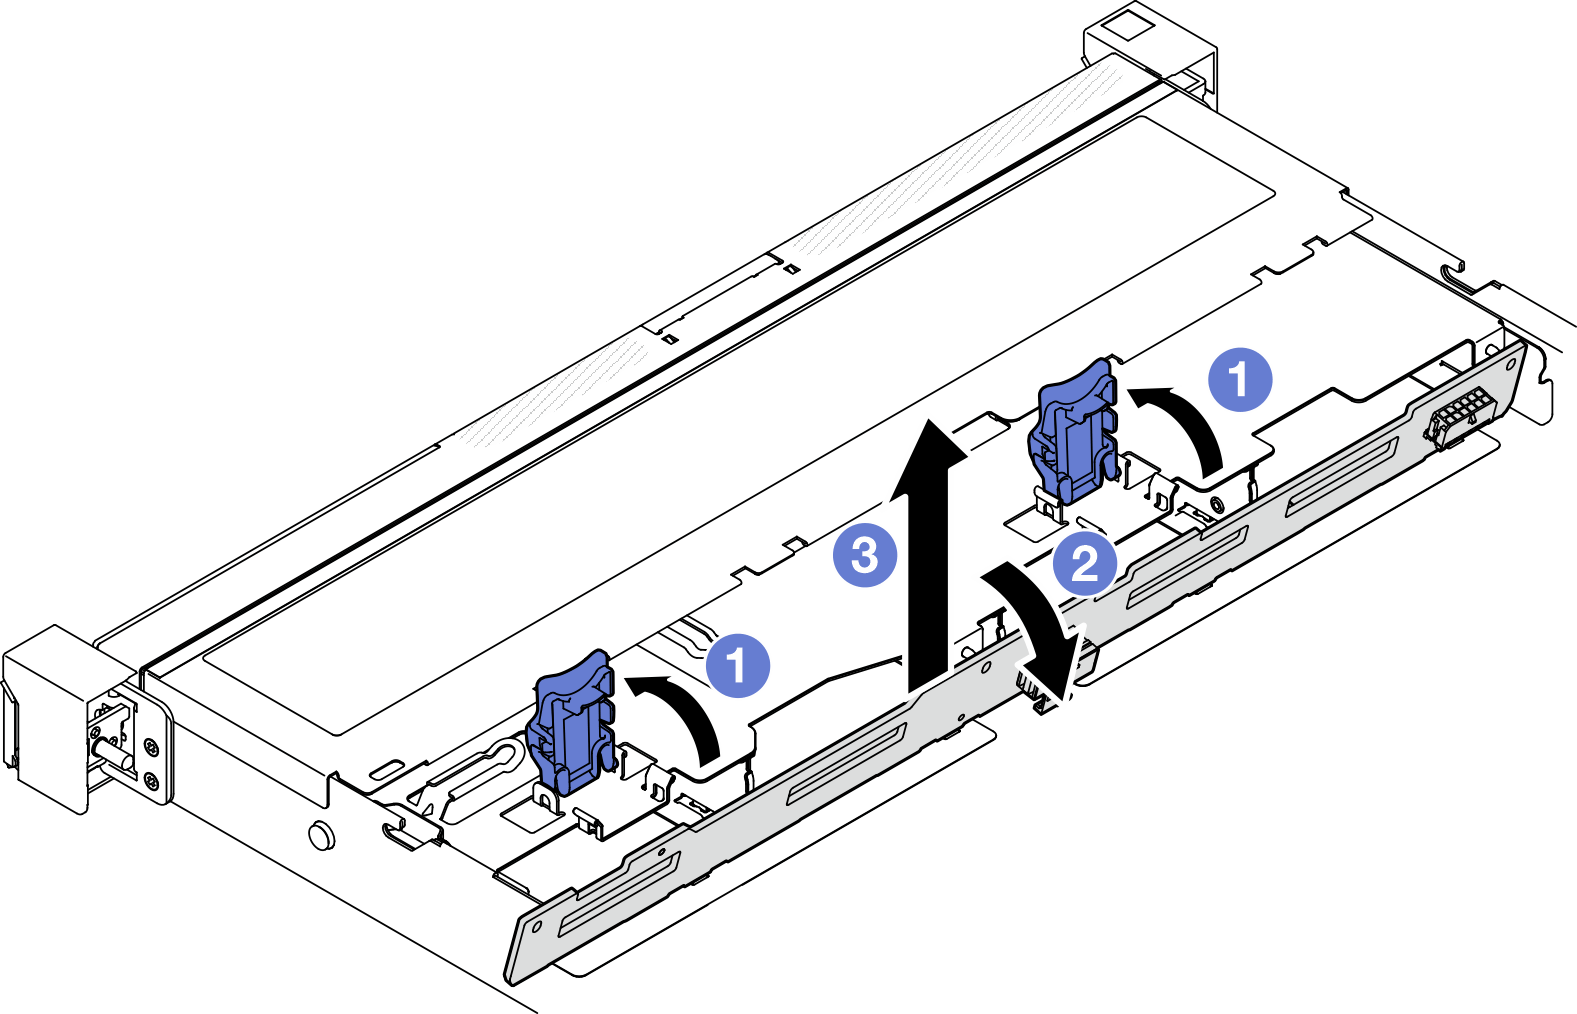 3.5-inch backplane removal